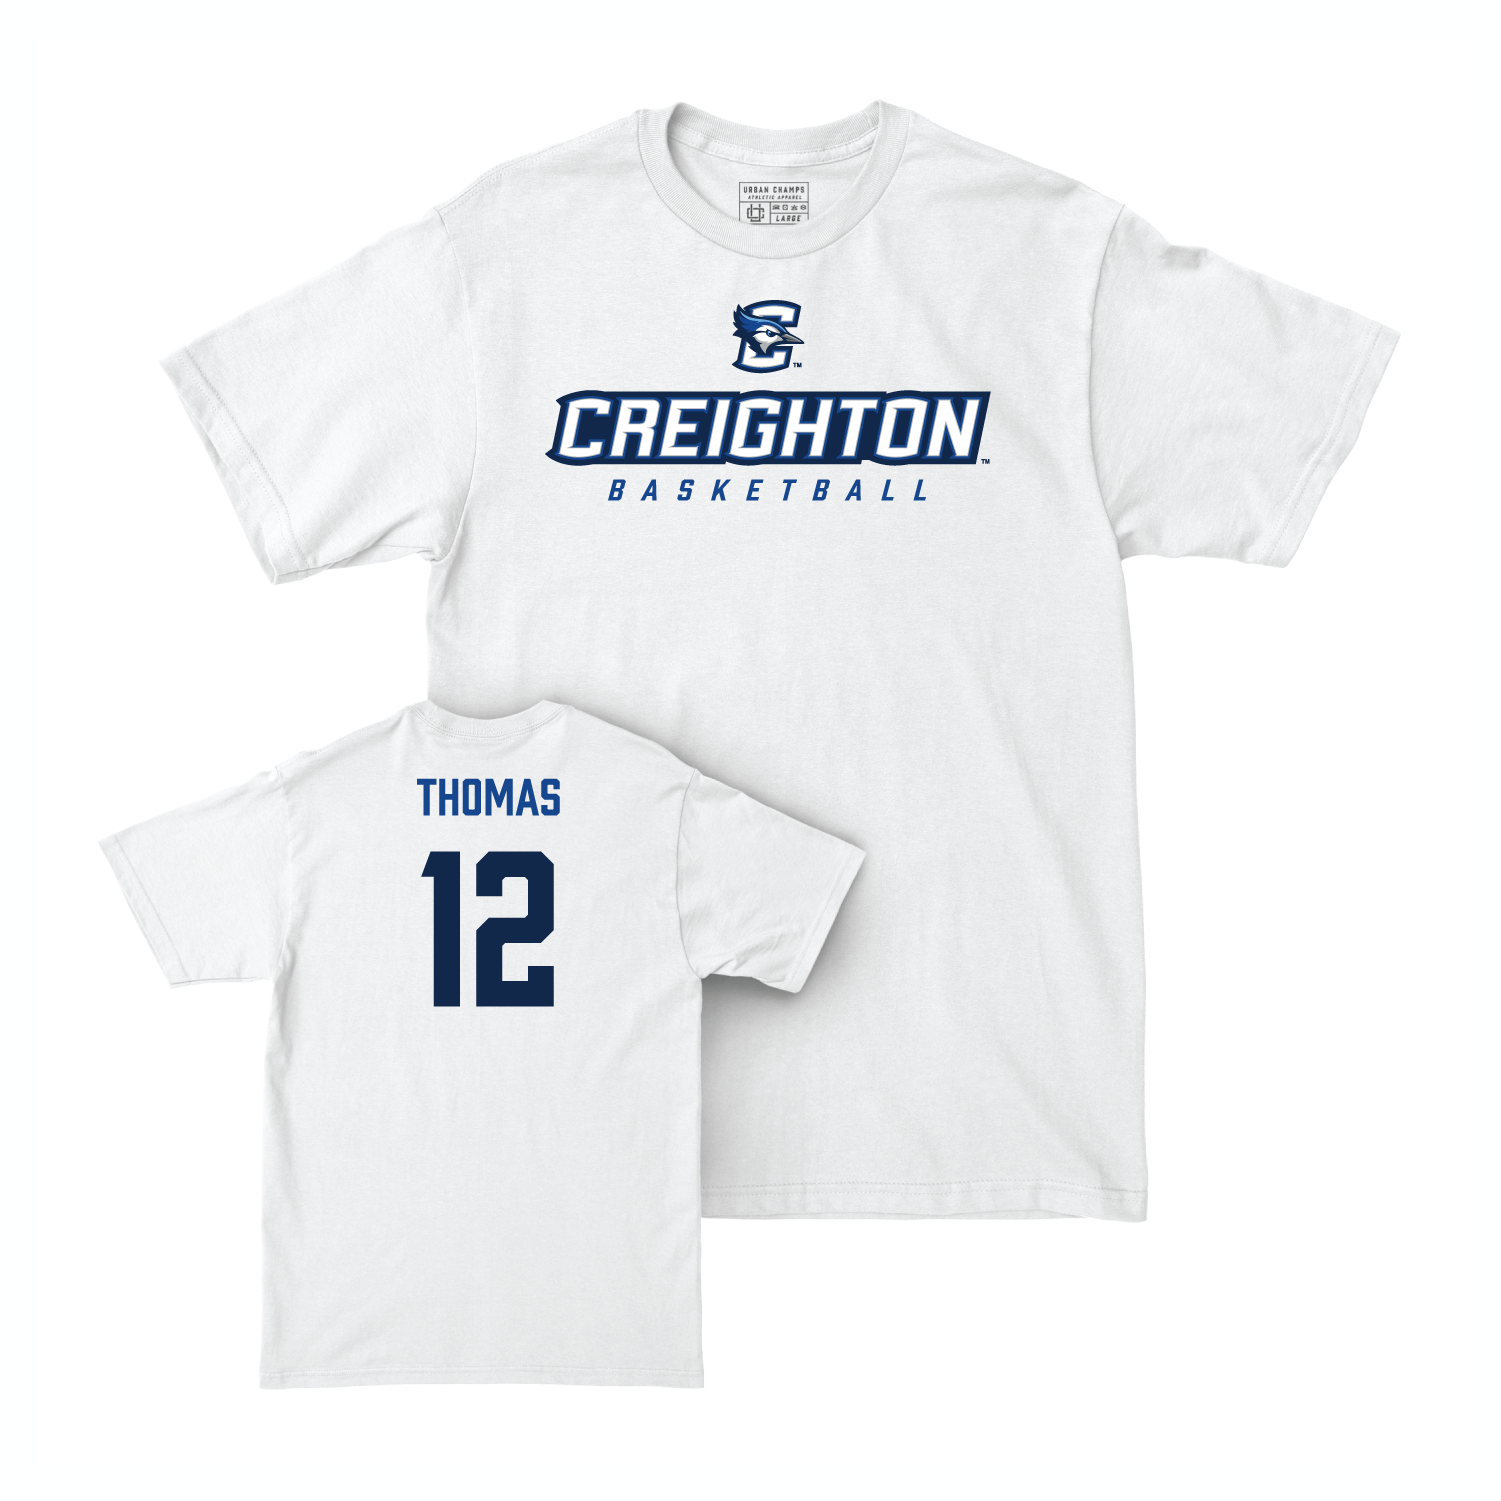 Creighton Men's Basketball White Athletic Comfort Colors Tee - Shane Thomas Youth Small